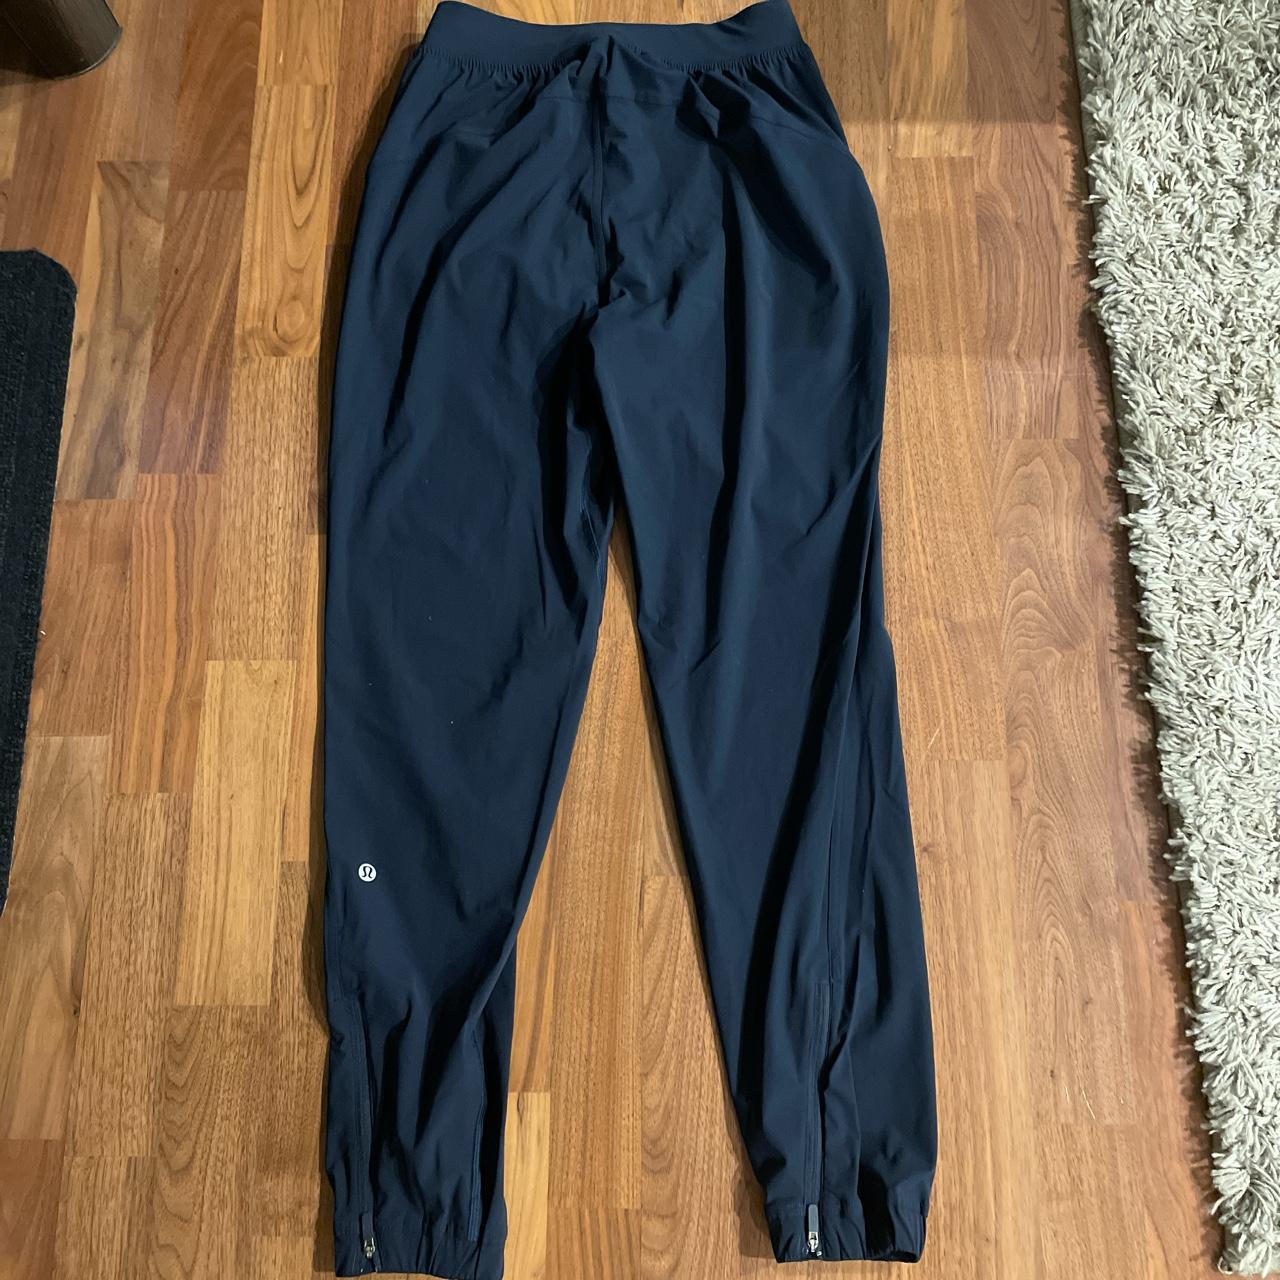 Lululemon Adapted State High arise Jogger in... - Depop